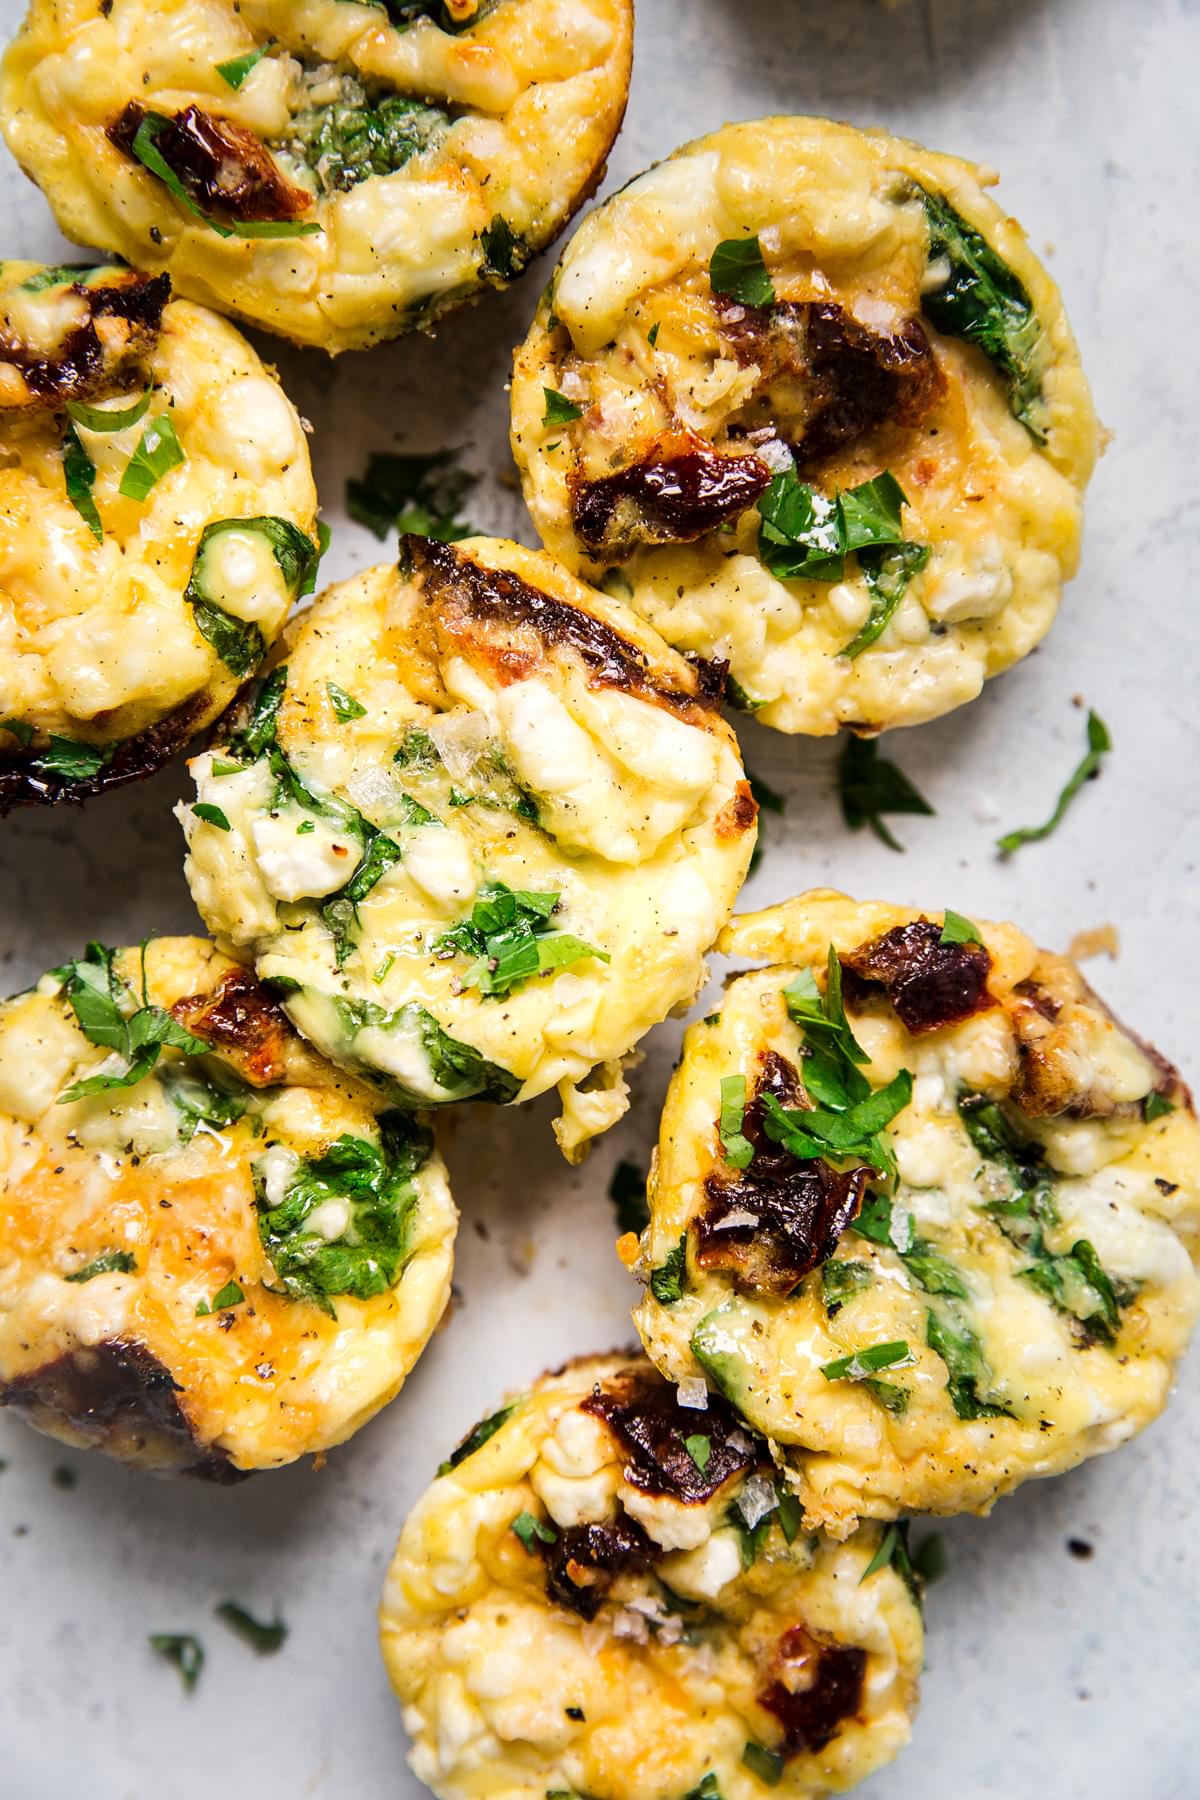 Spinach Feta Egg Muffins with sun dried tomatoes